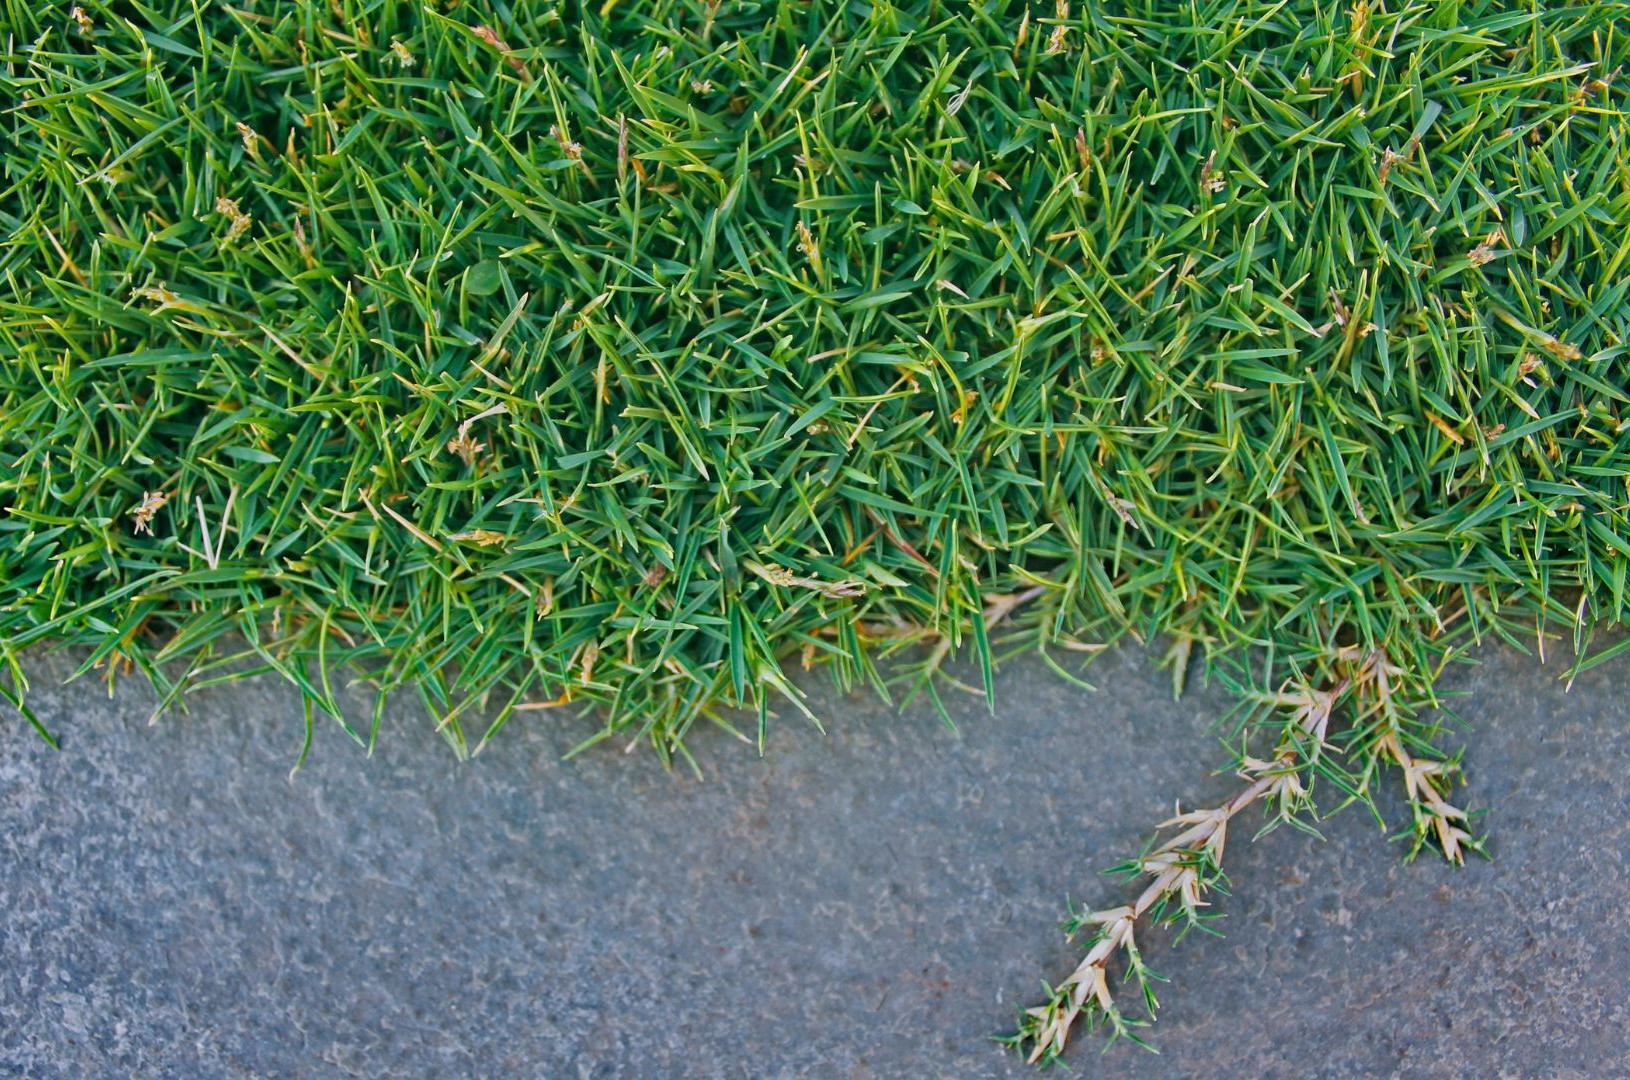 Turfgrass Benefits, Types and Care Guidelines